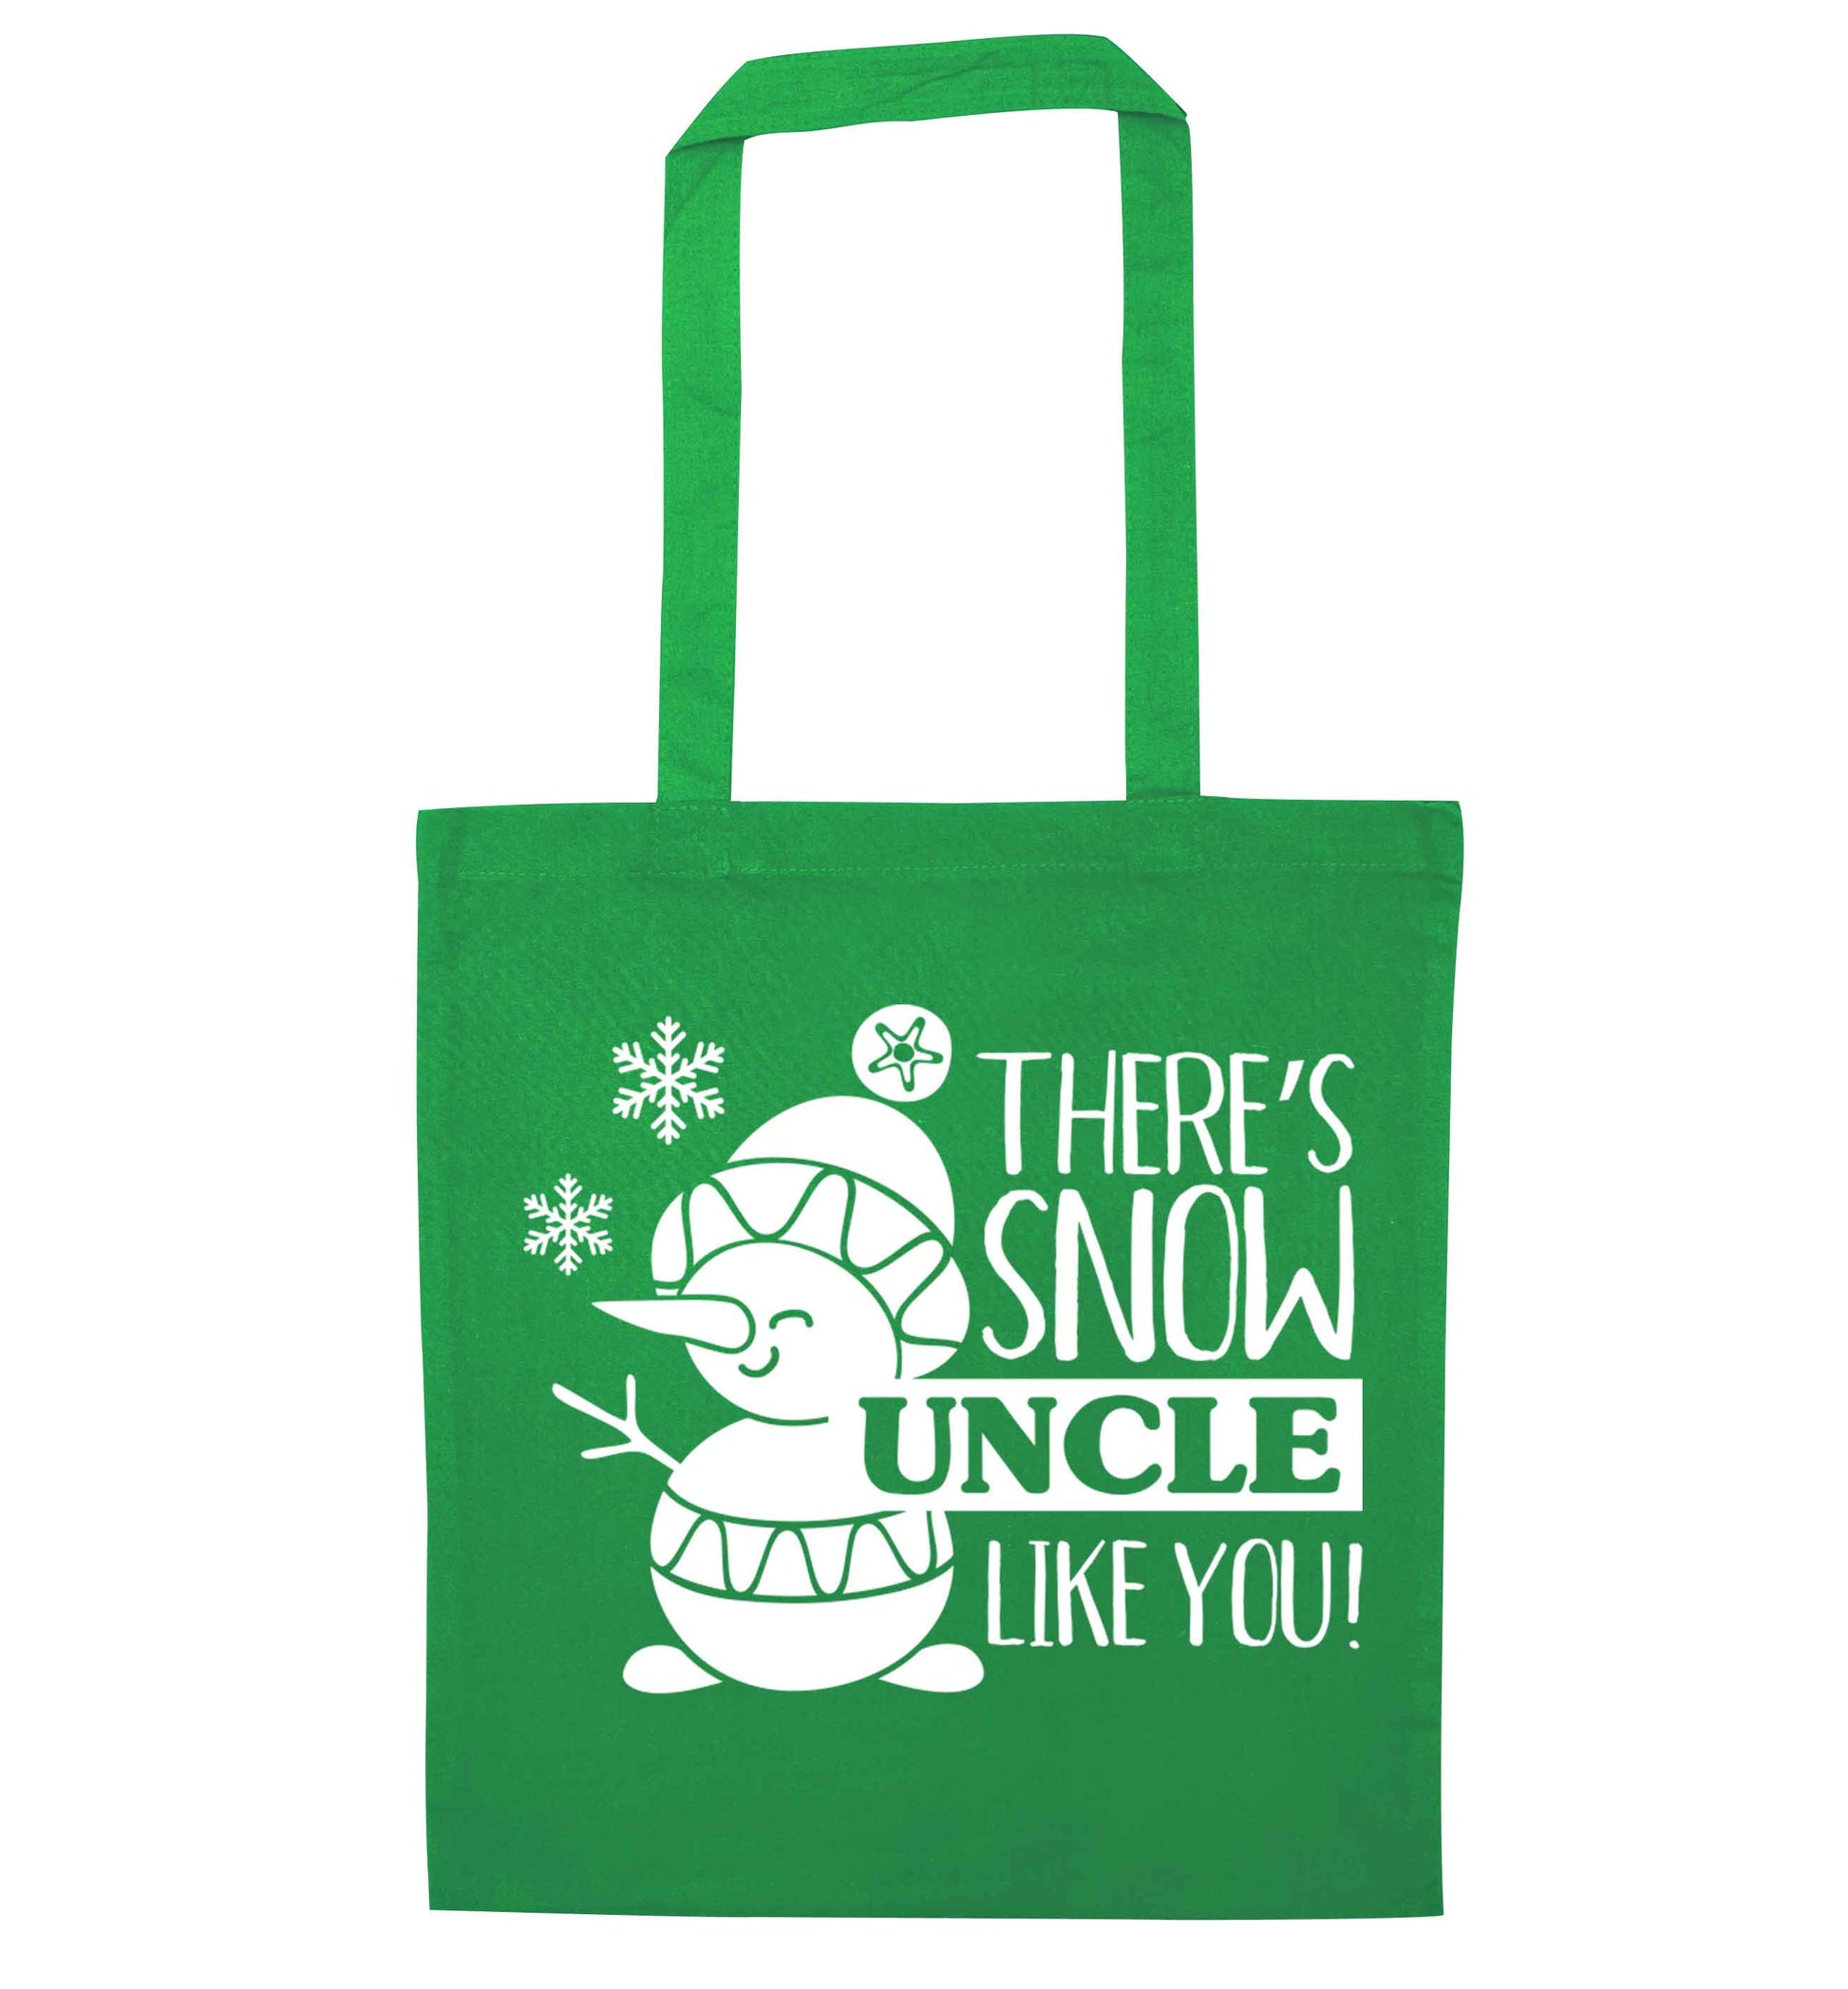 There's snow uncle like you green tote bag